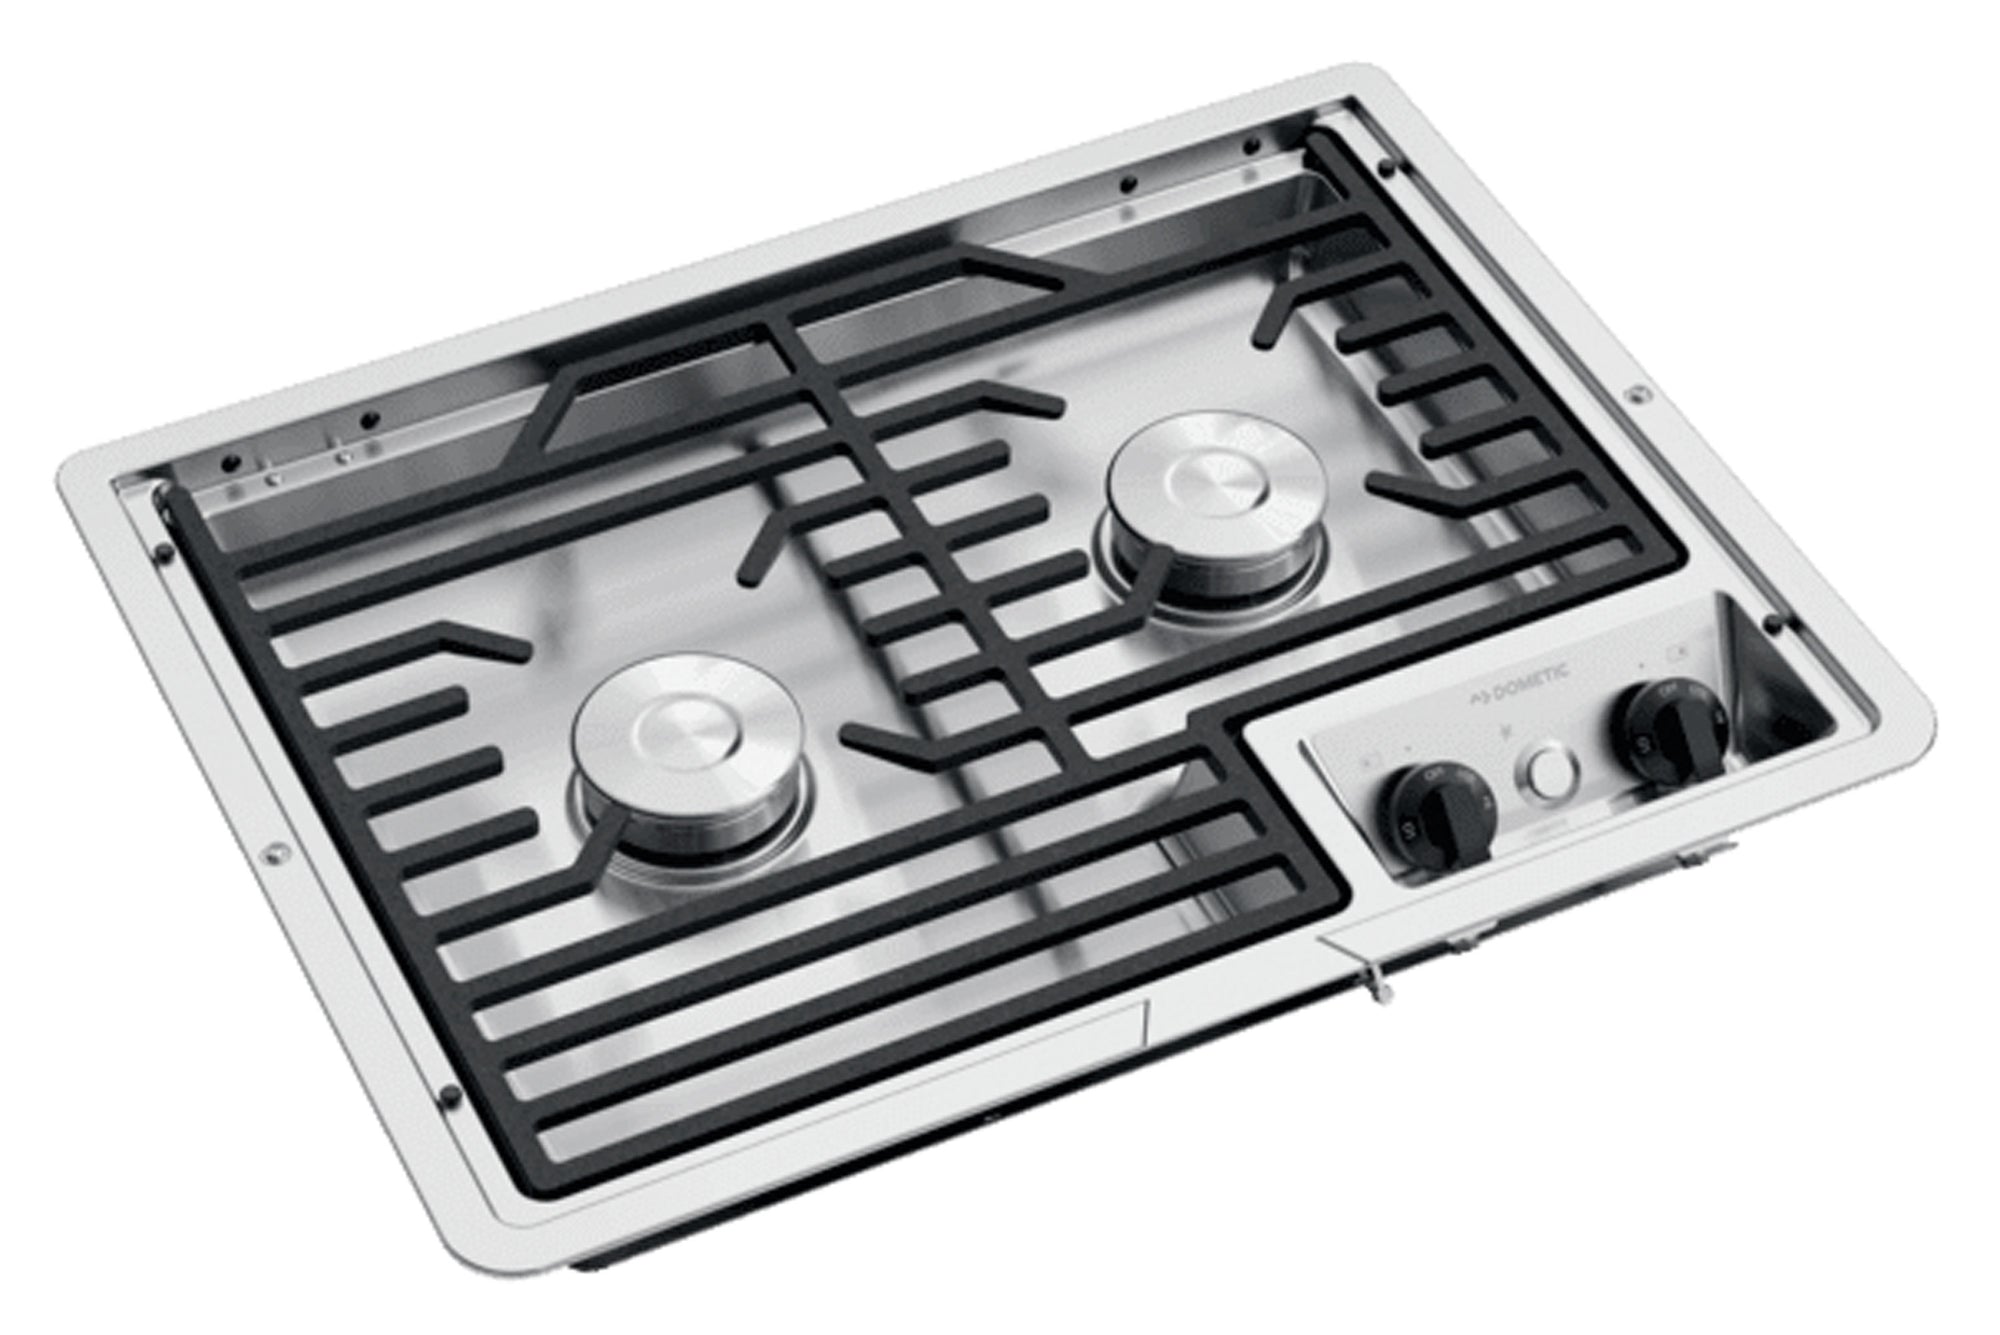 Dometic 9600014658 (50216G) Drop-In Two-Burner 12V Cooktop with Cast Iron Grate - Stainless Steel, Propane